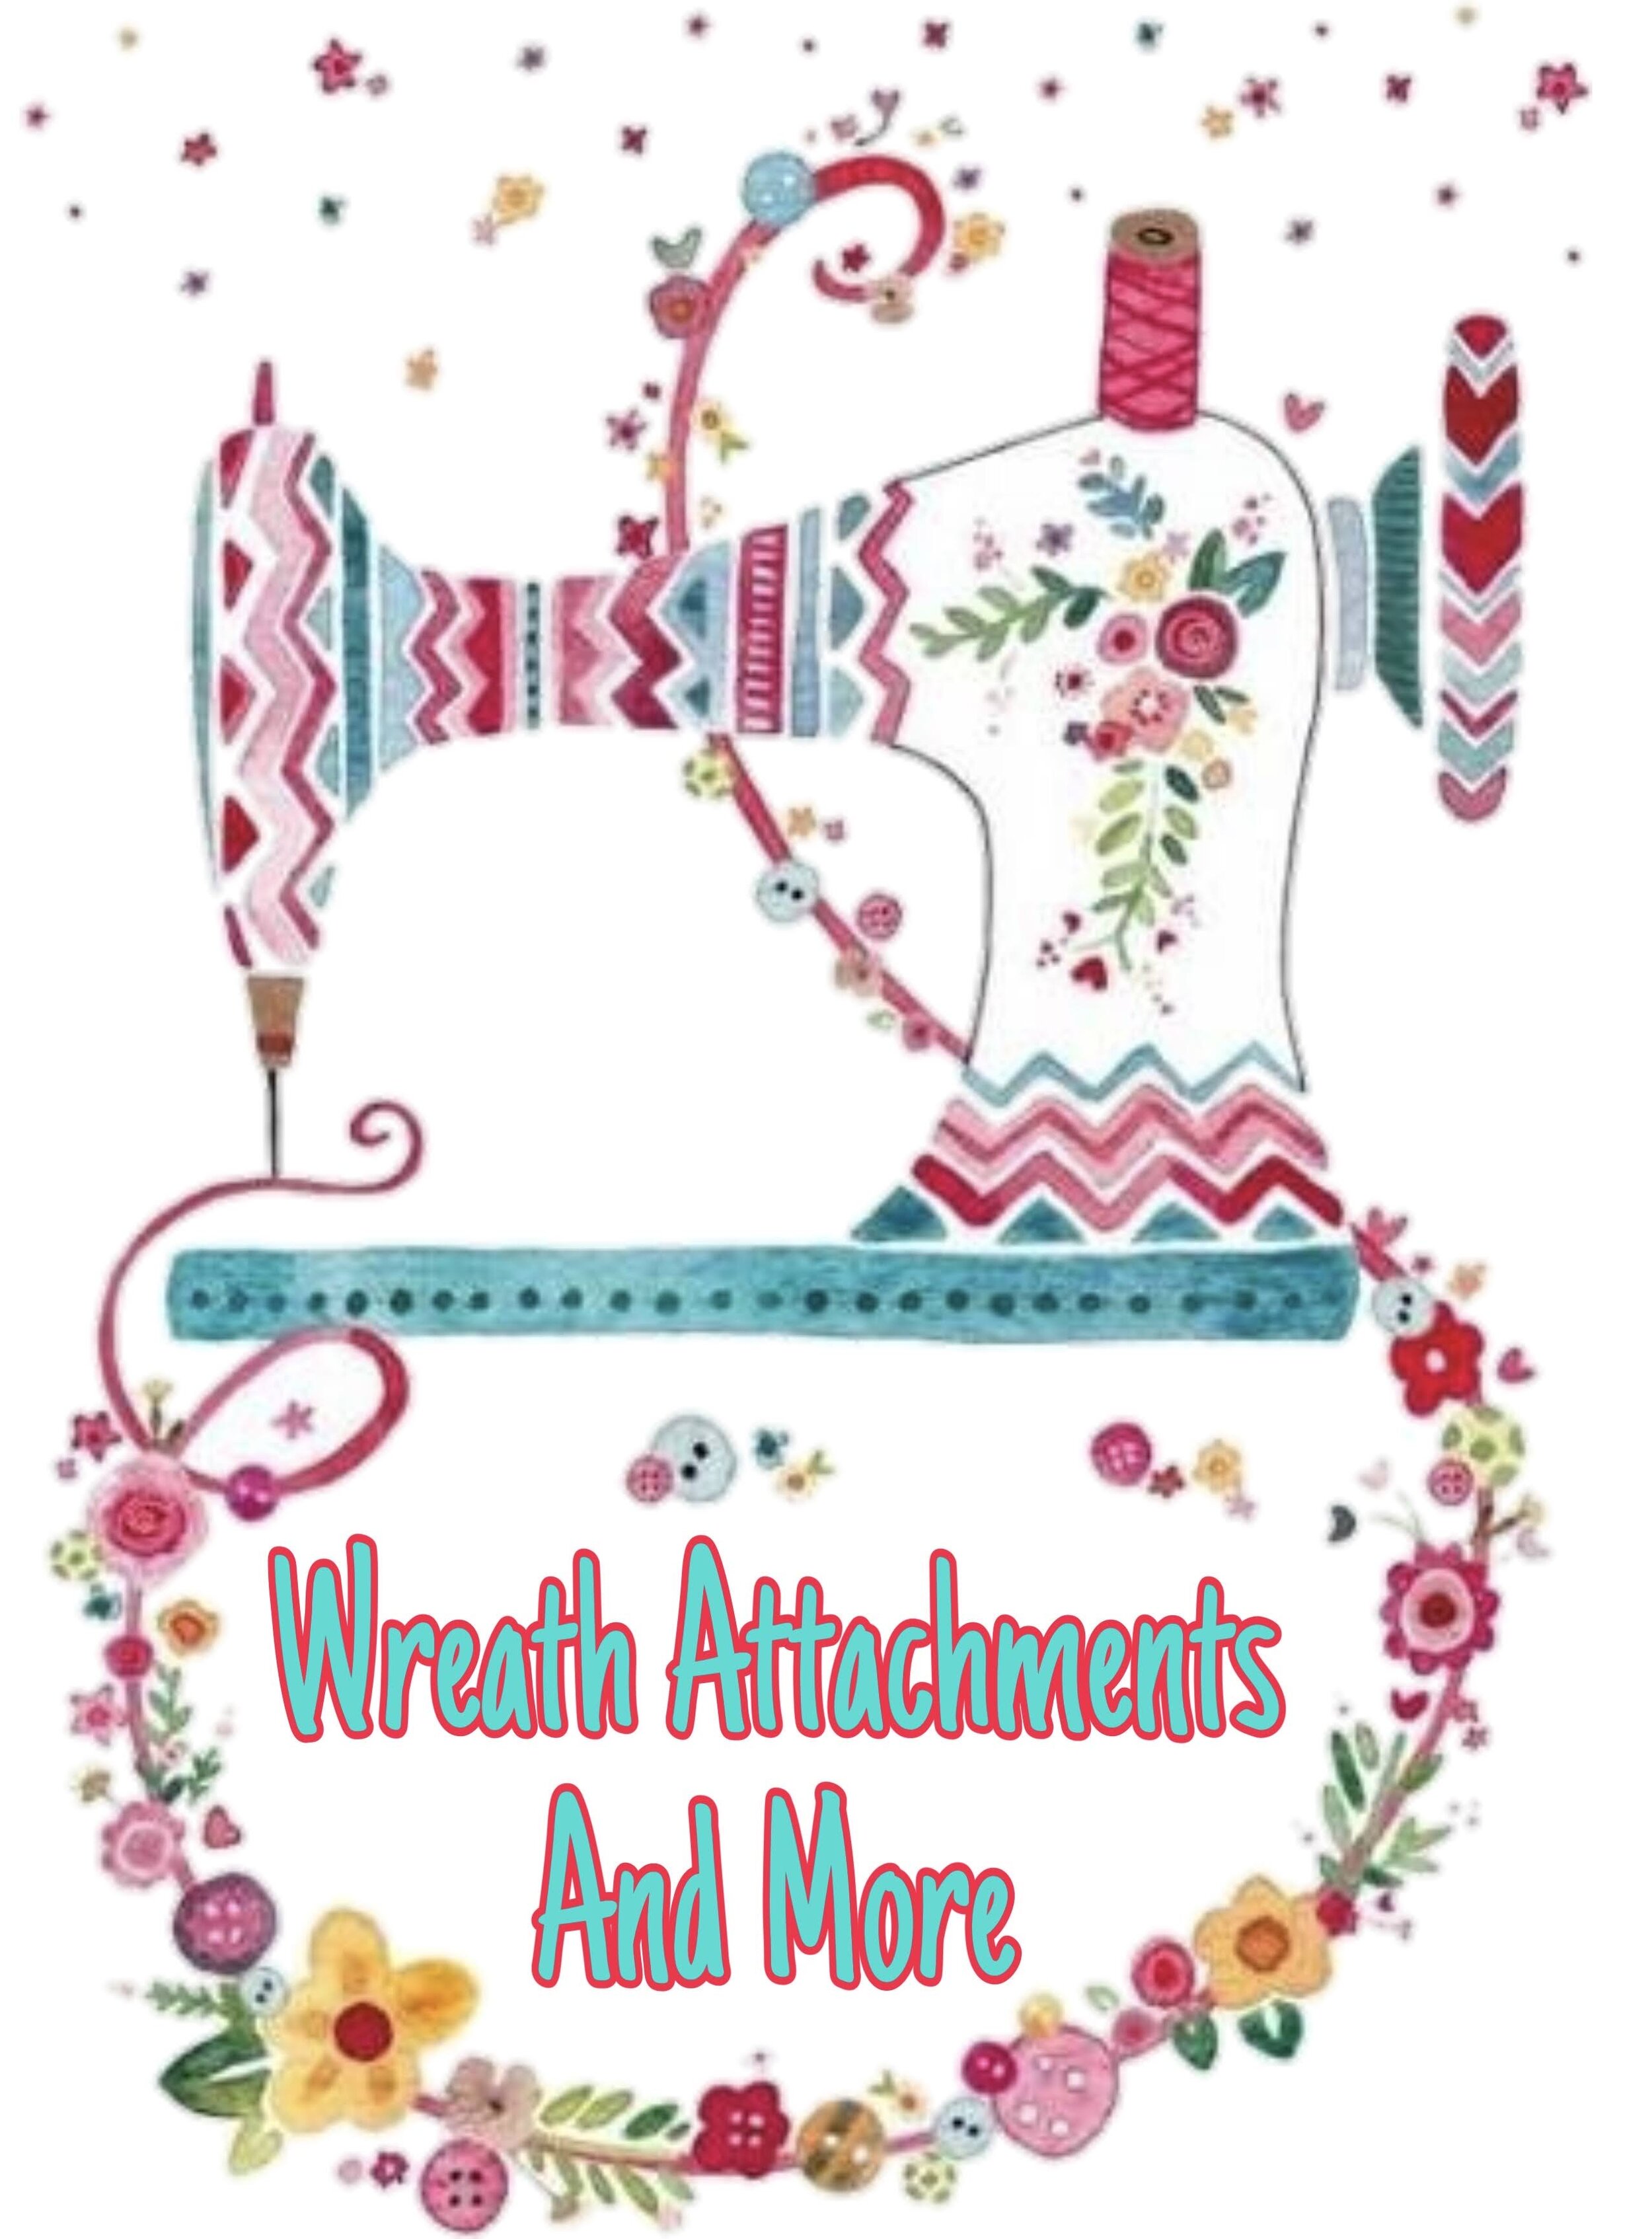 Wreath Attachments and More